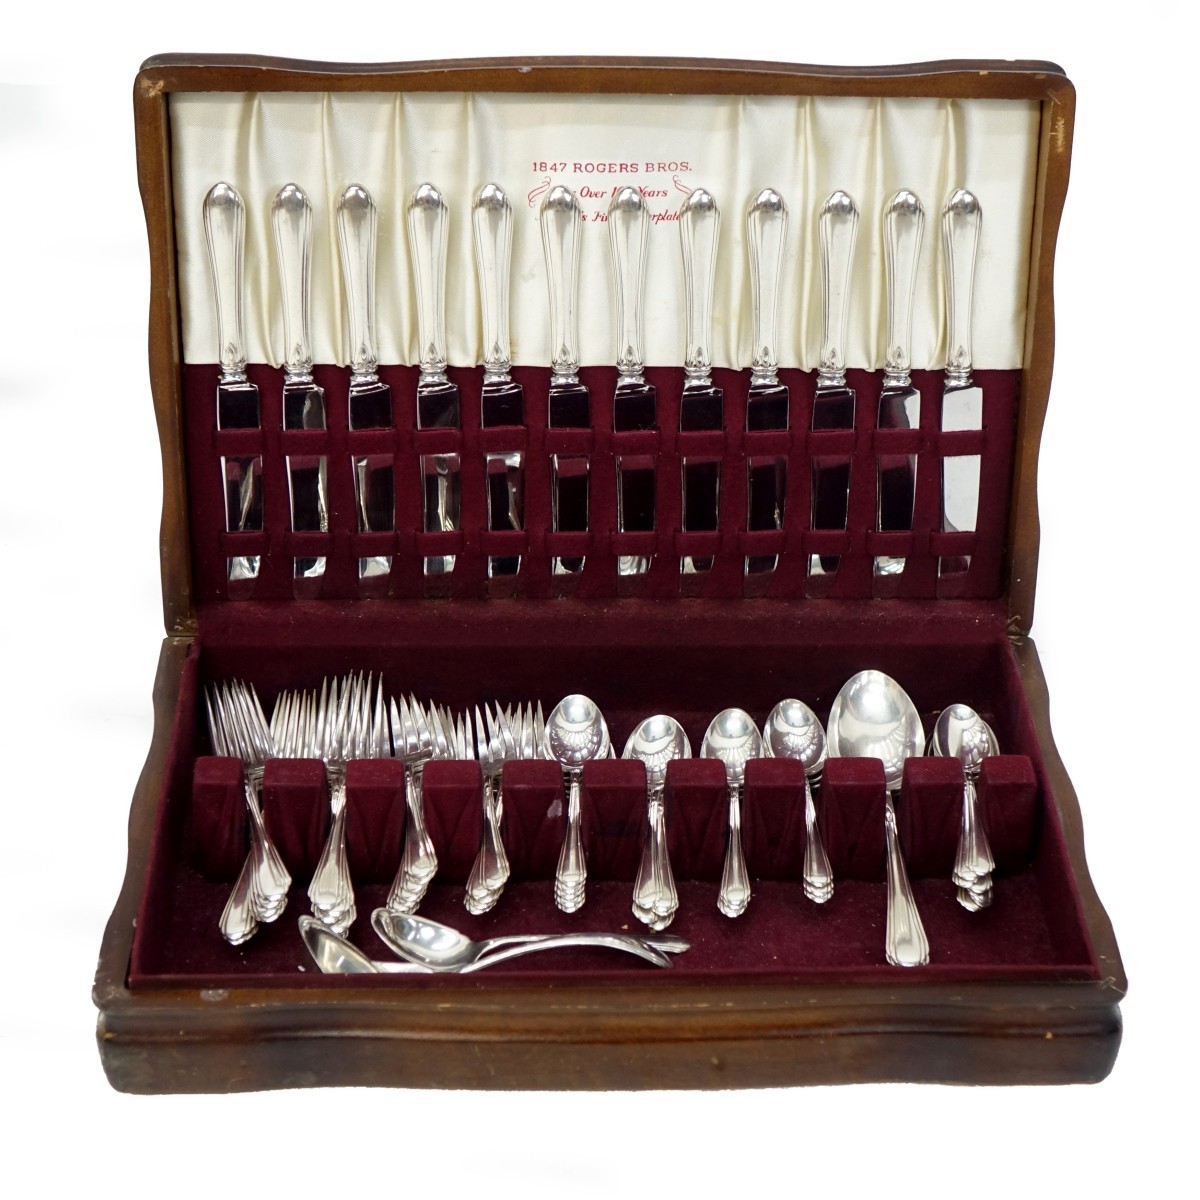 64) Pc. Towle "Lady Diana" Sterling Flatware